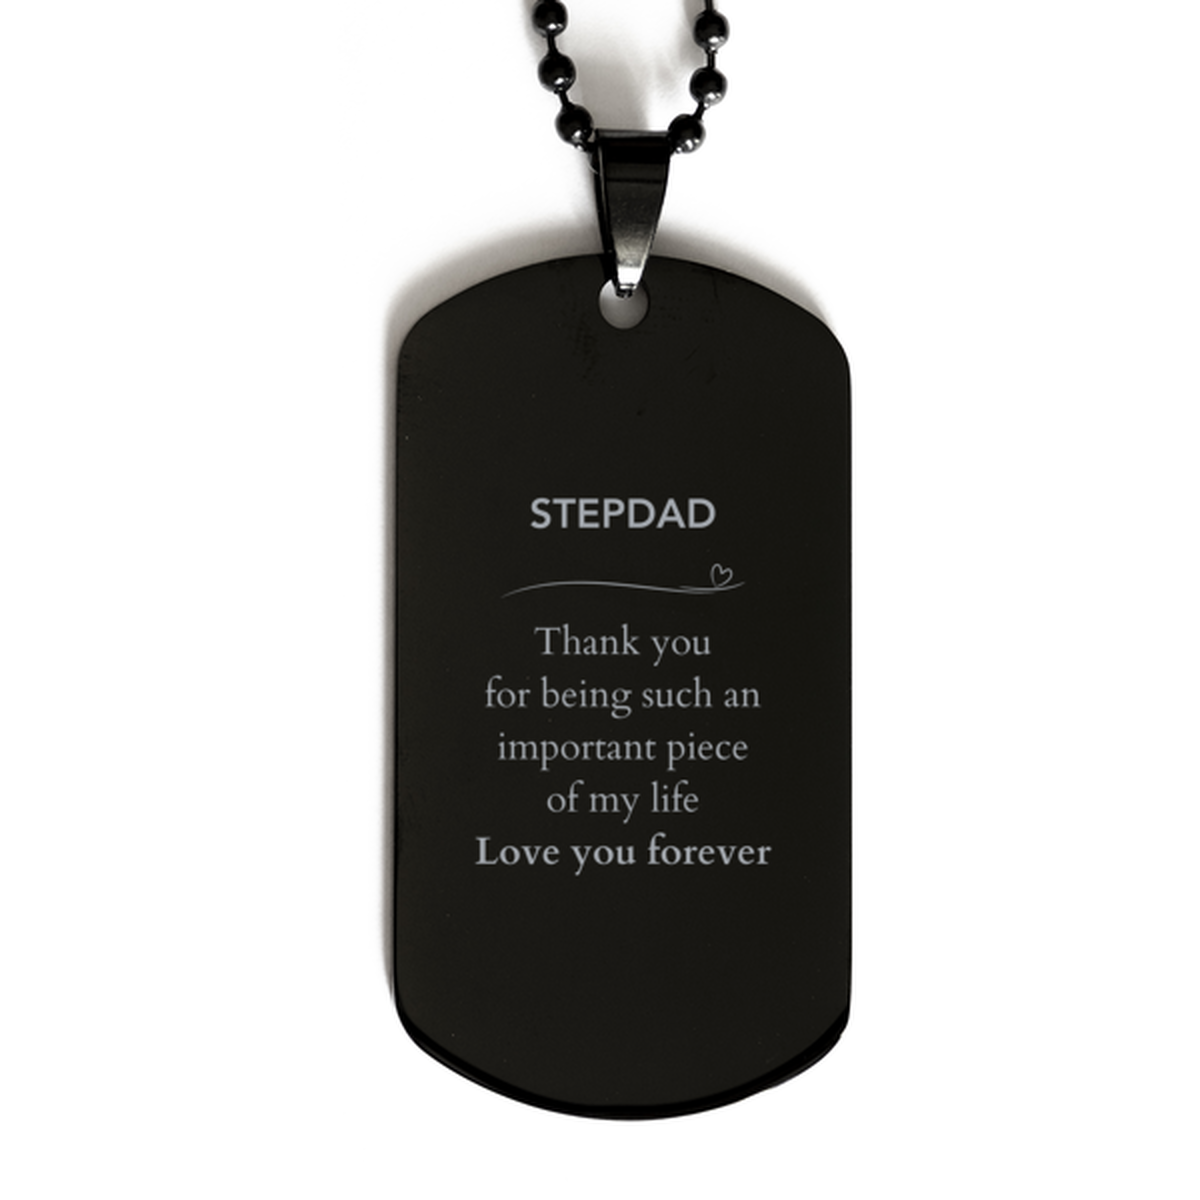 Appropriate Stepdad Black Dog Tag Epic Birthday Gifts for Stepdad Thank you for being such an important piece of my life Stepdad Christmas Mothers Fathers Day